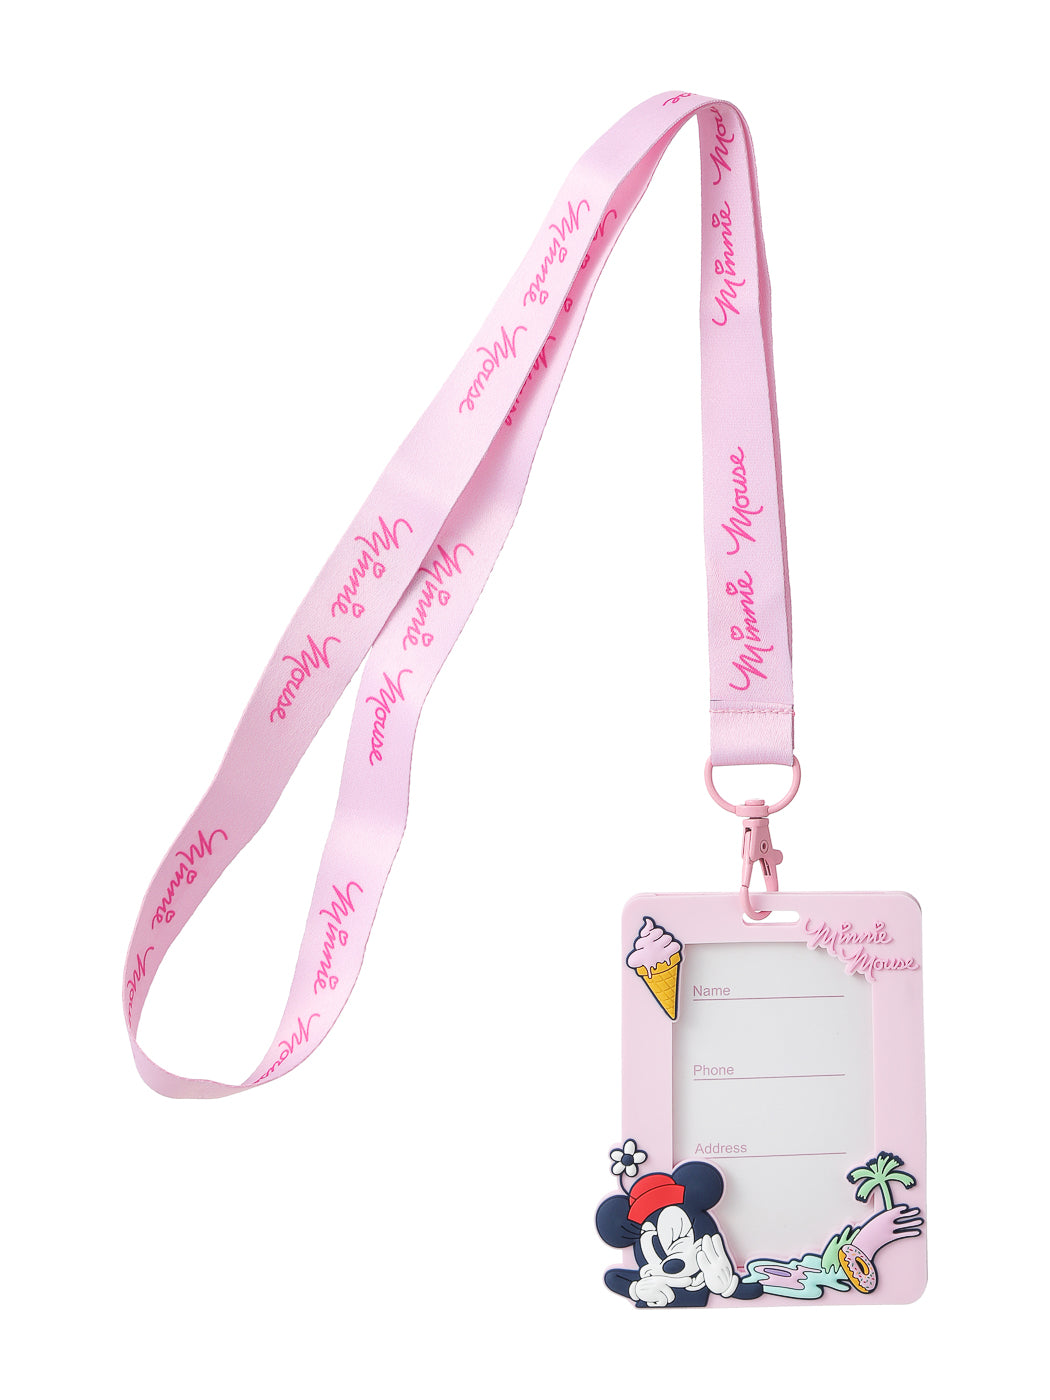 MINISO MICKEY MOUSE COLLECTION 2.0 NECK-HANGING CERTIFICATE HOLDER(MINNIE MOUSE) 2010516611100 TRAVEL ACCESSORIES